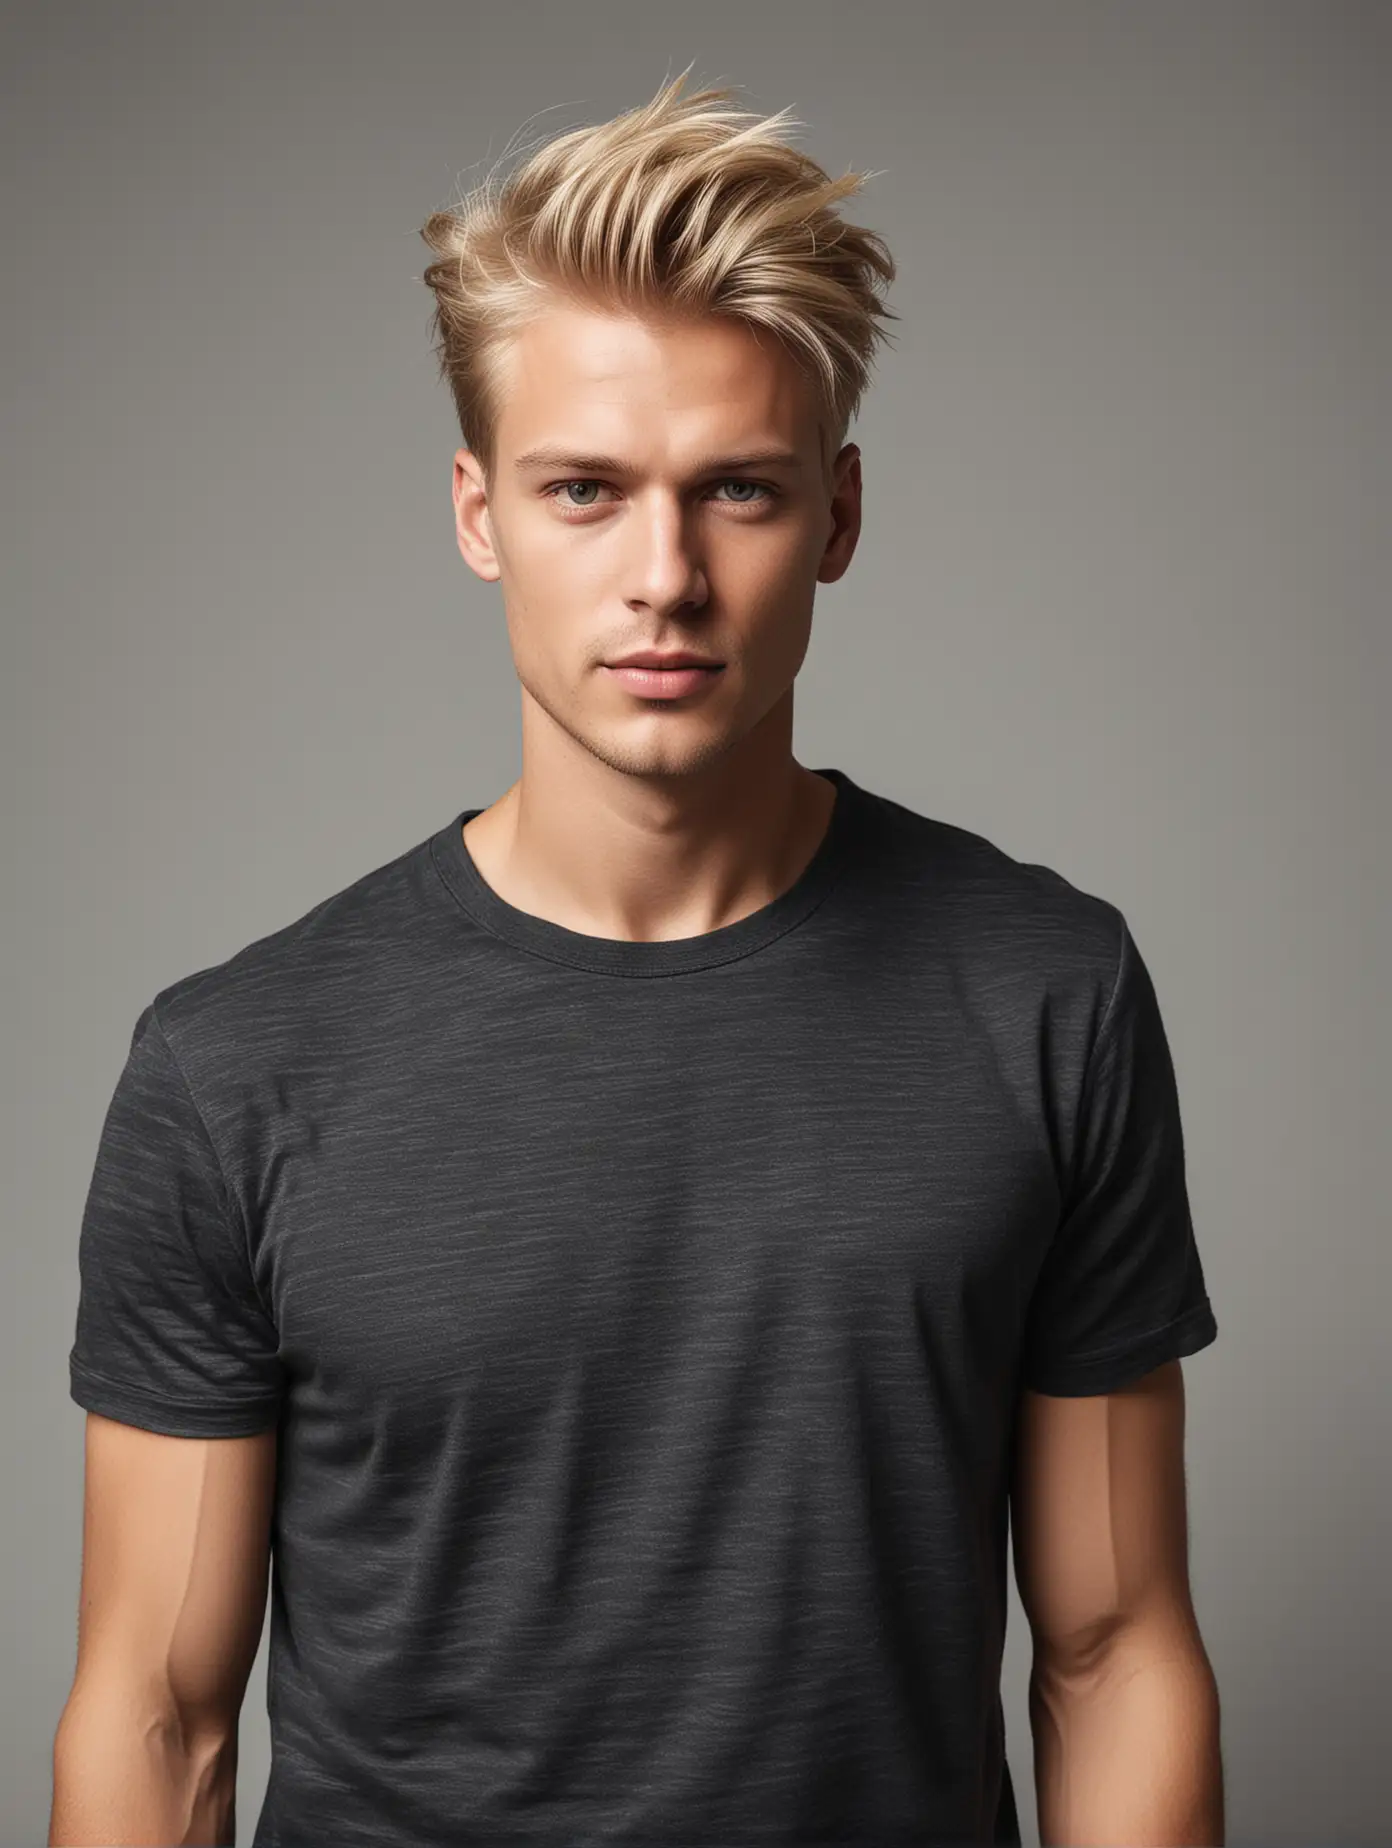 Fashionable Blond Man in Charcoal TShirt